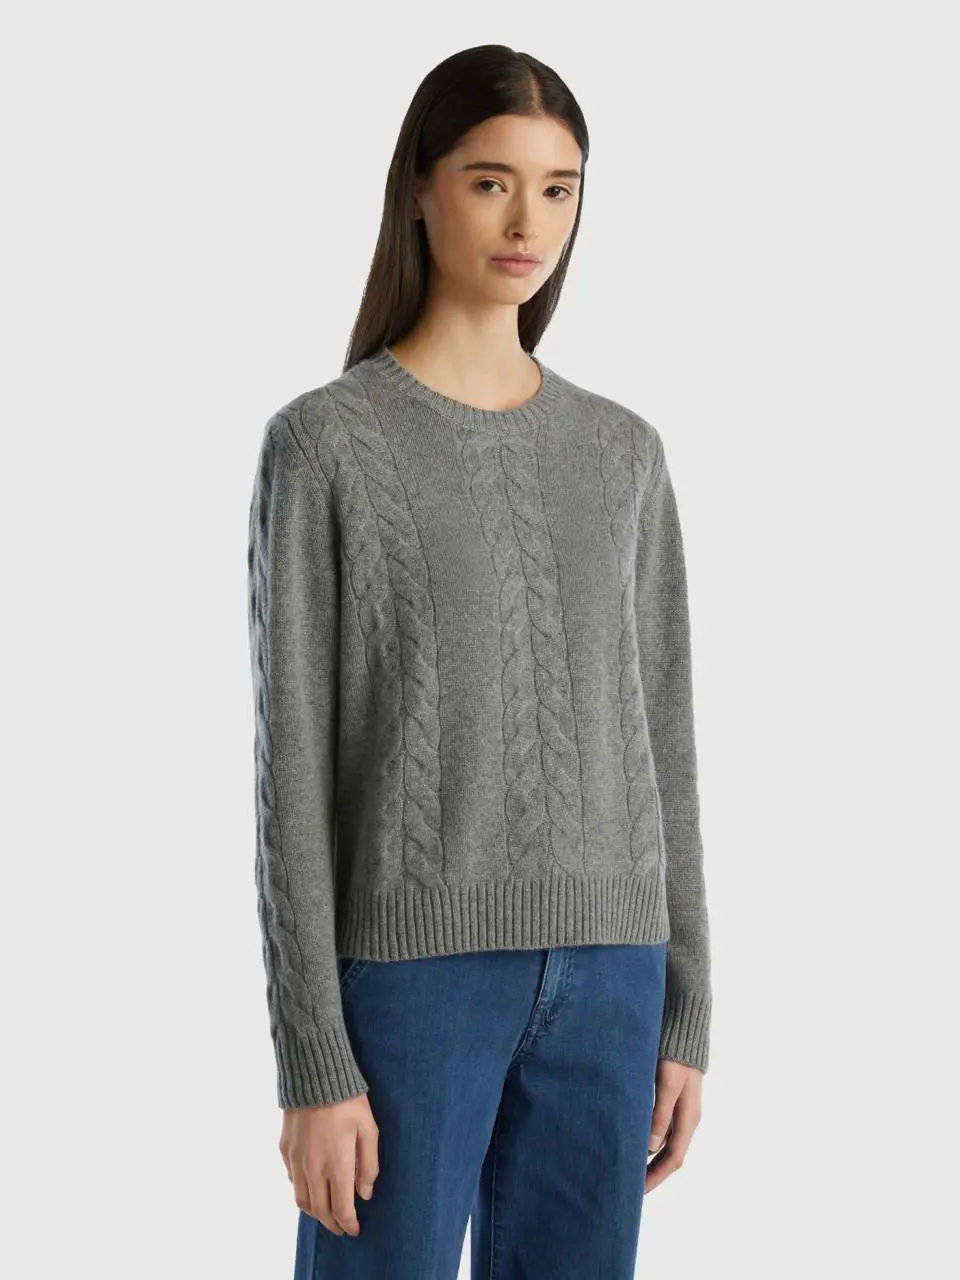 Benetton cable knit sweater in pure cashmere. 1